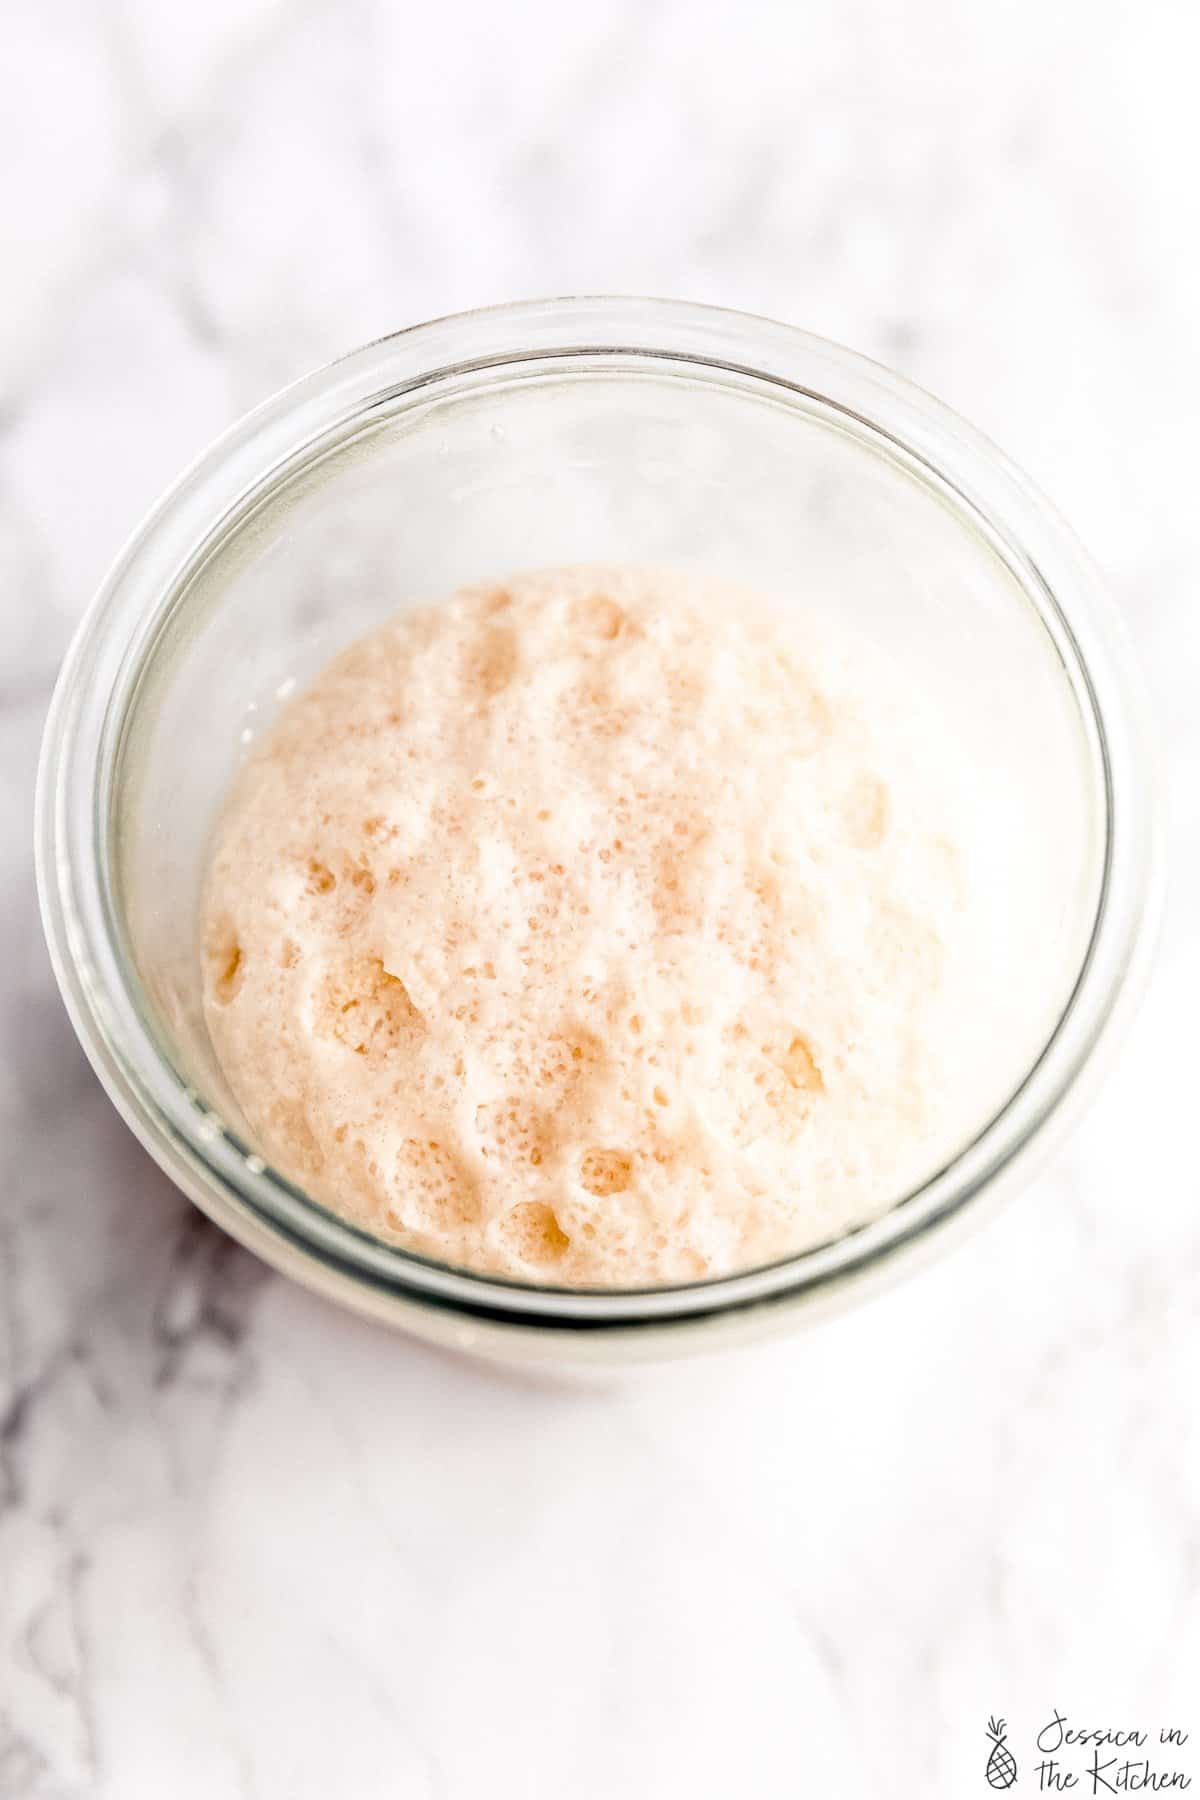 A bowl of yeast foaming in water